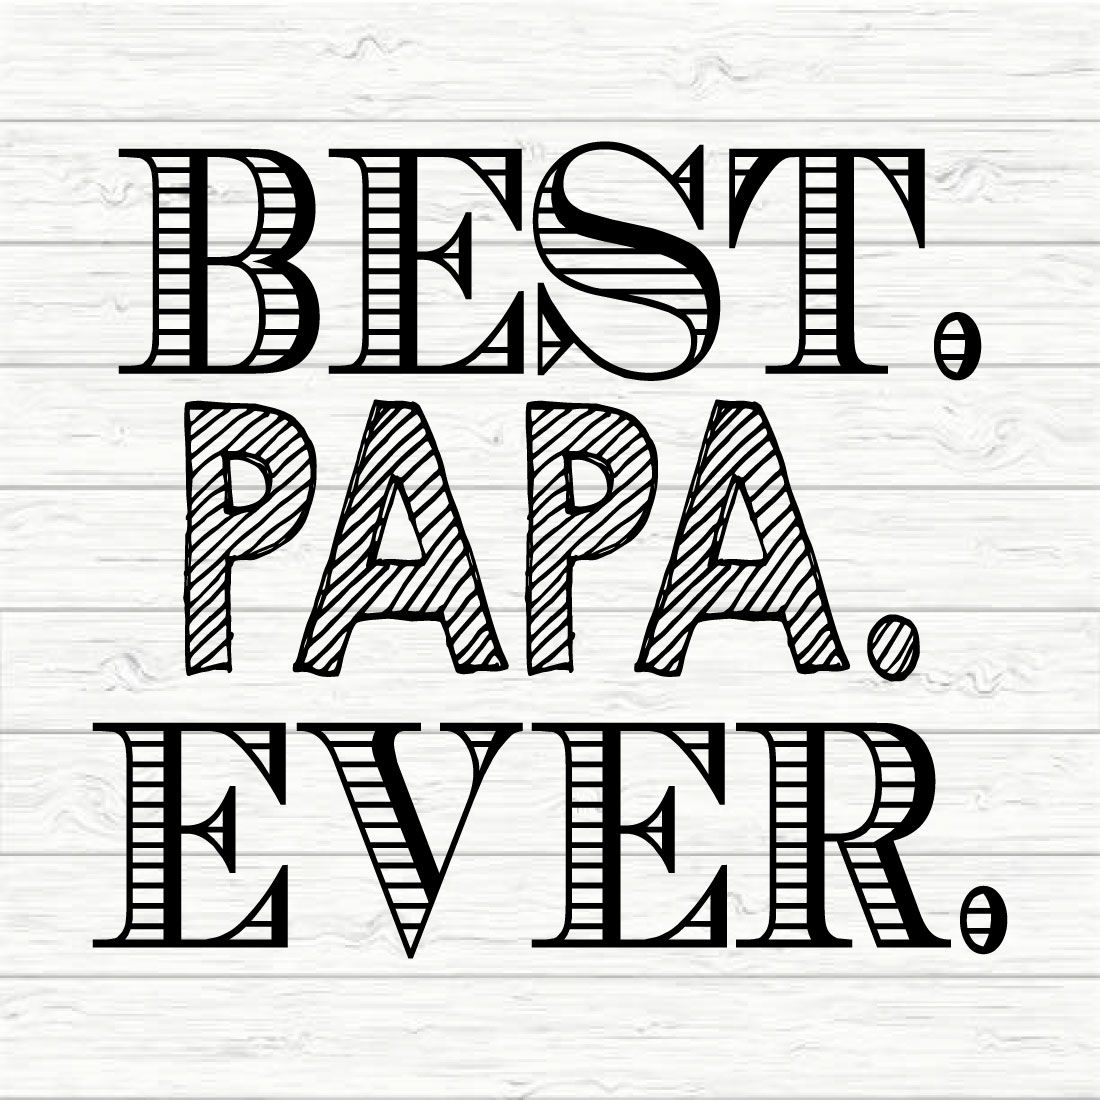 Best papa ever preview image.